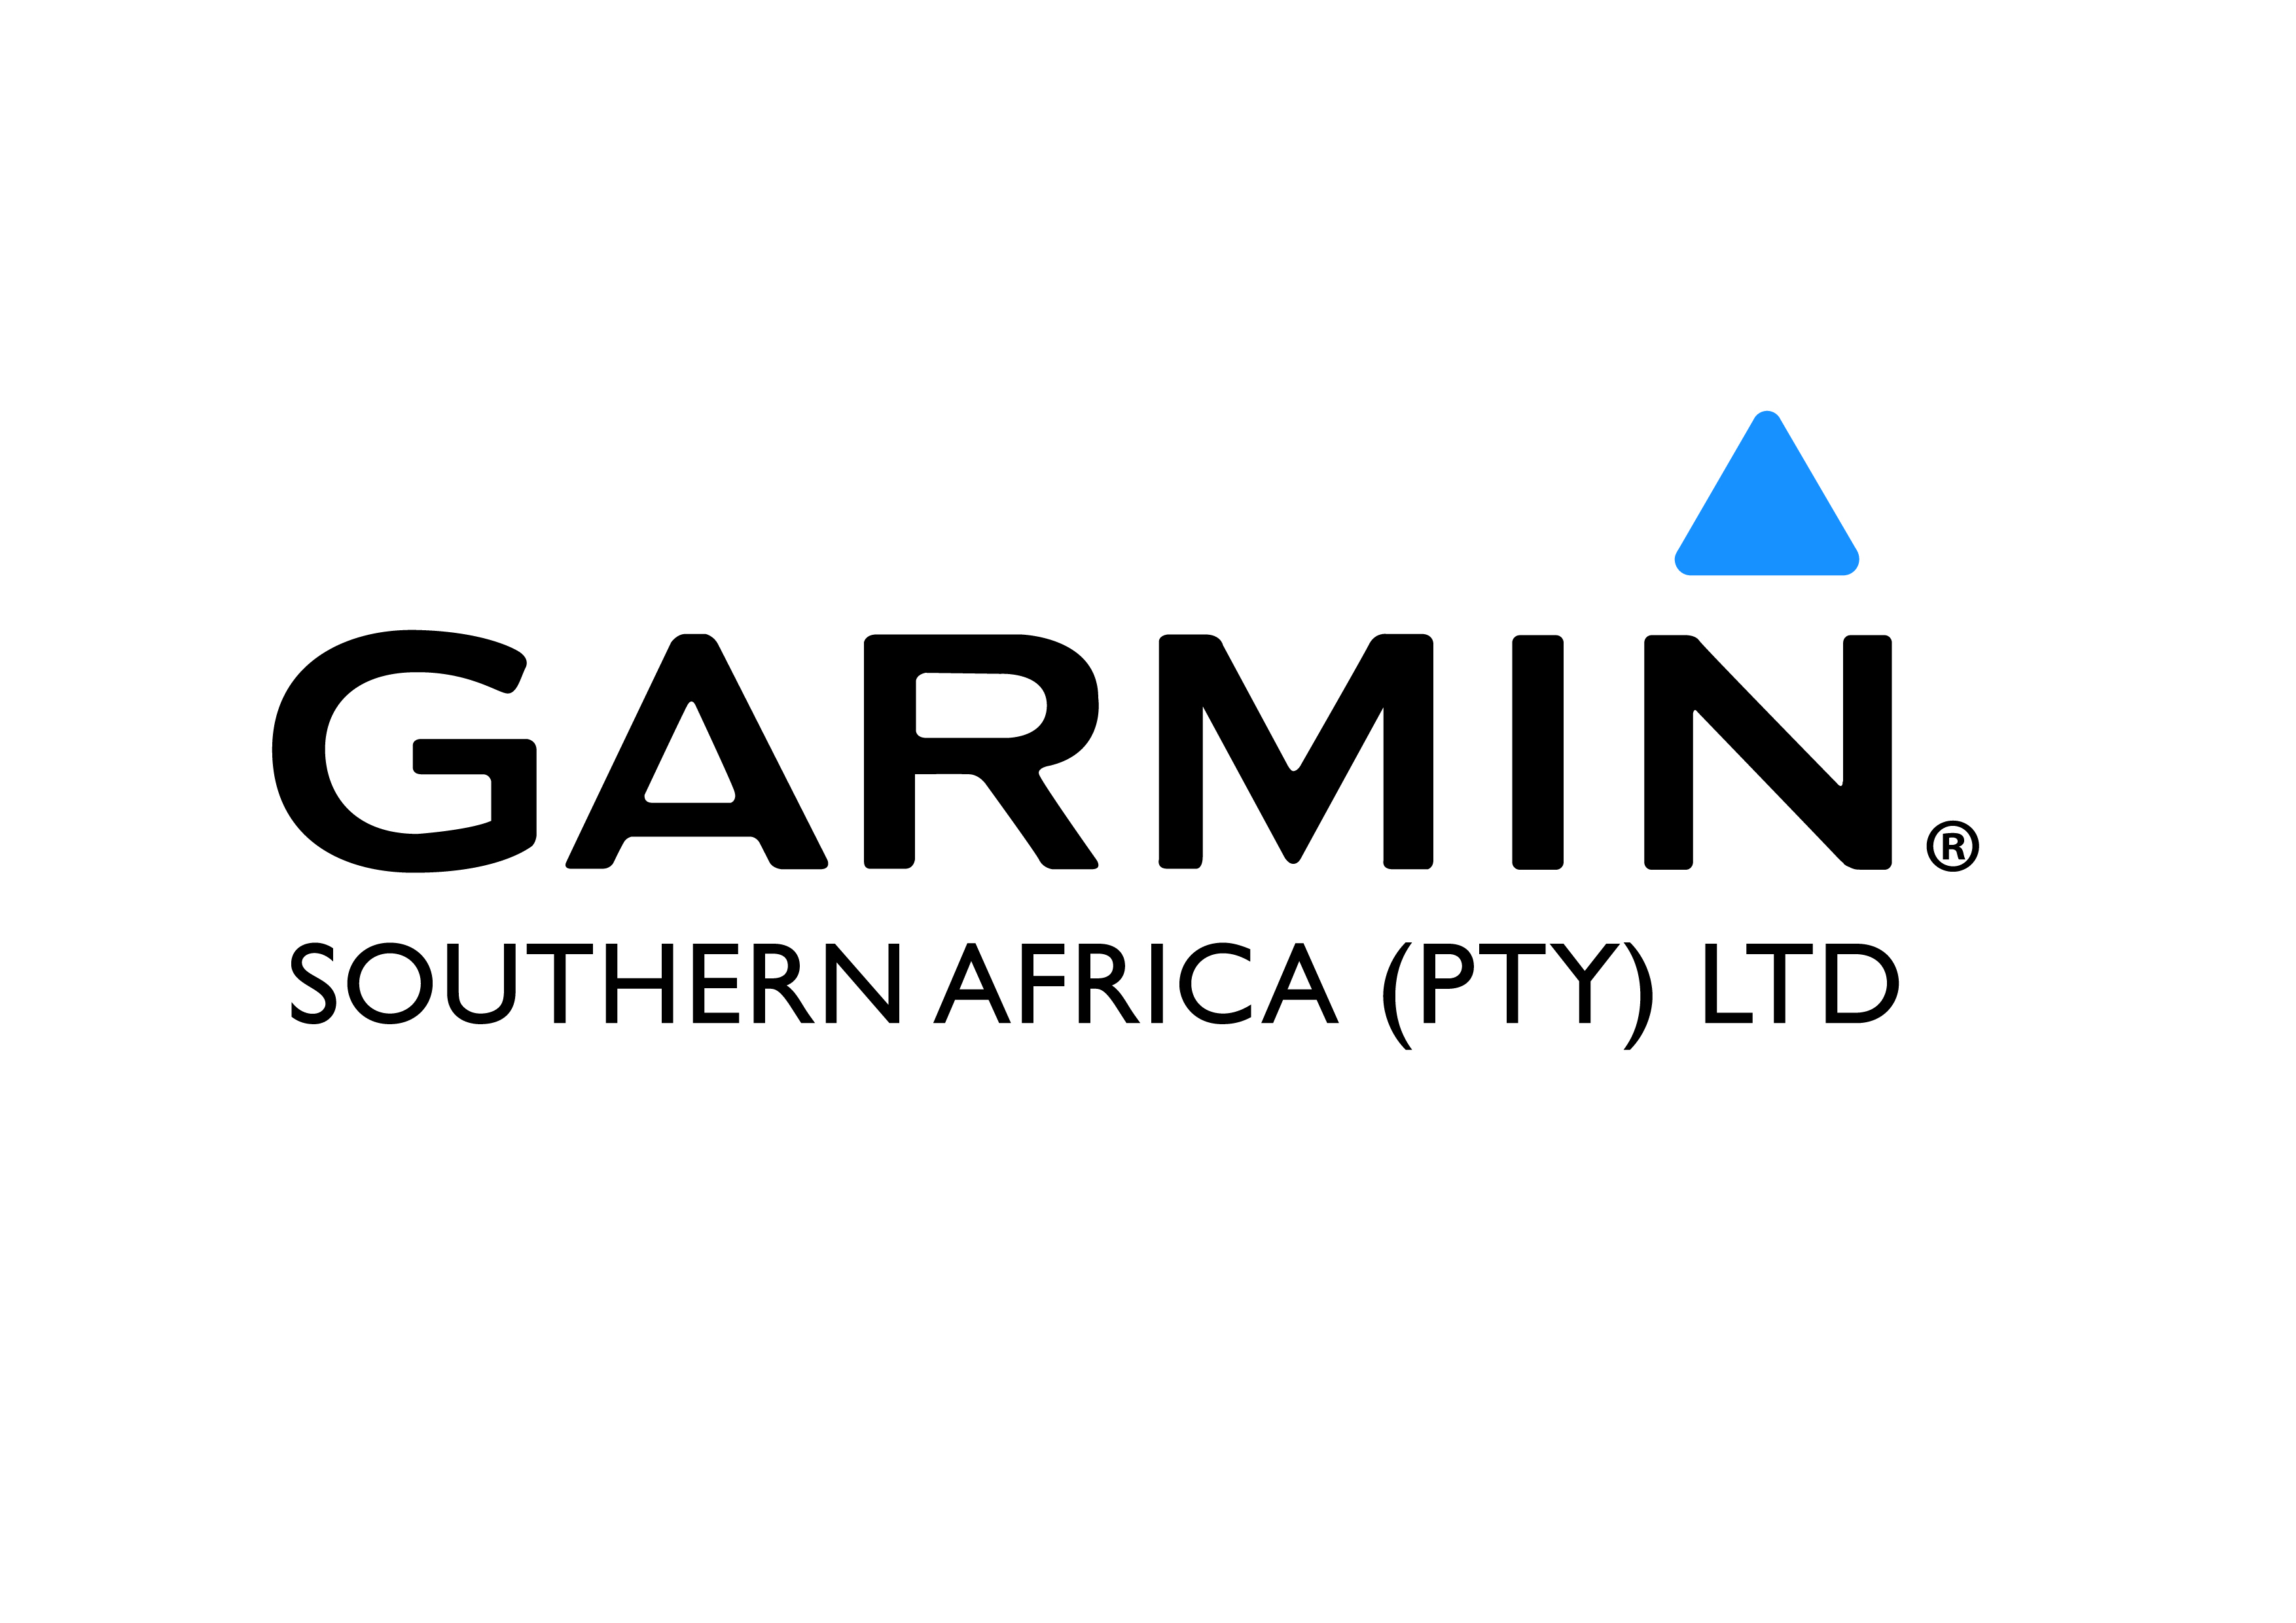 Garmin, the Global Leader in GPS Satellite Technology, is calling on buyers in Southern Africa